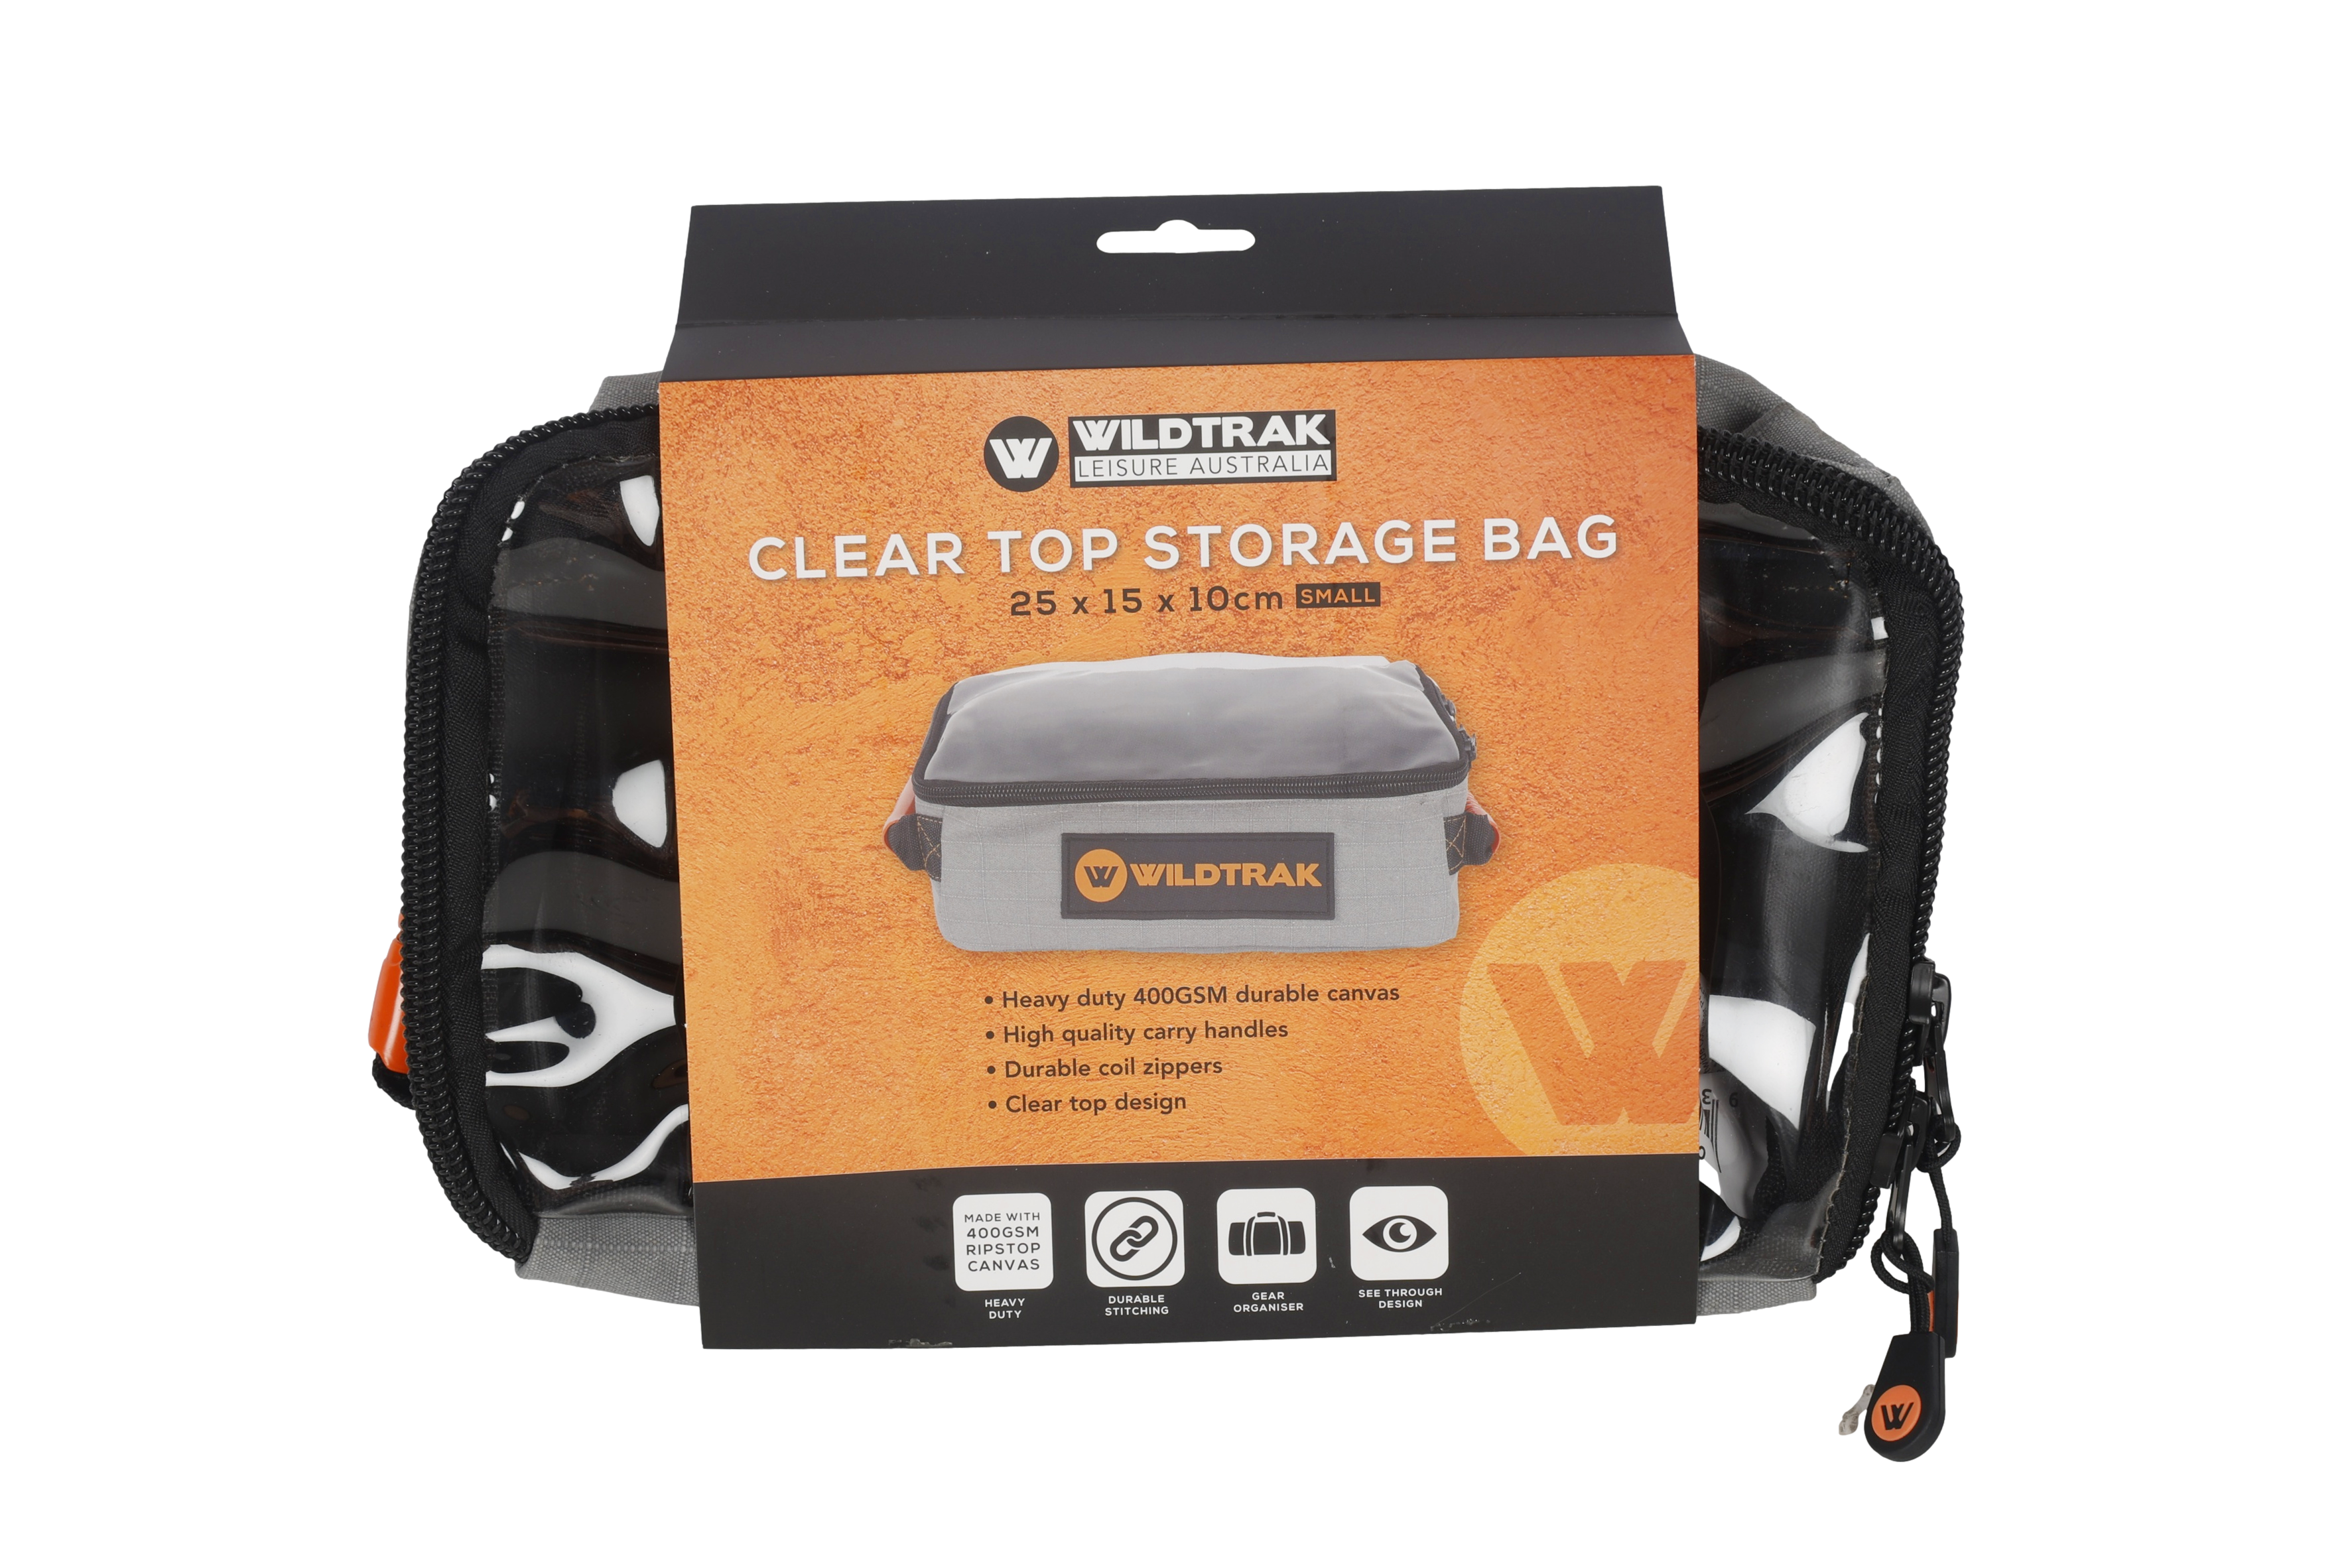 Wildtrak™ Medium Clear Top Storage Bag for Camping and 4WD Off-Roading - Heavy-Duty 400GSM Ripstop Canvas